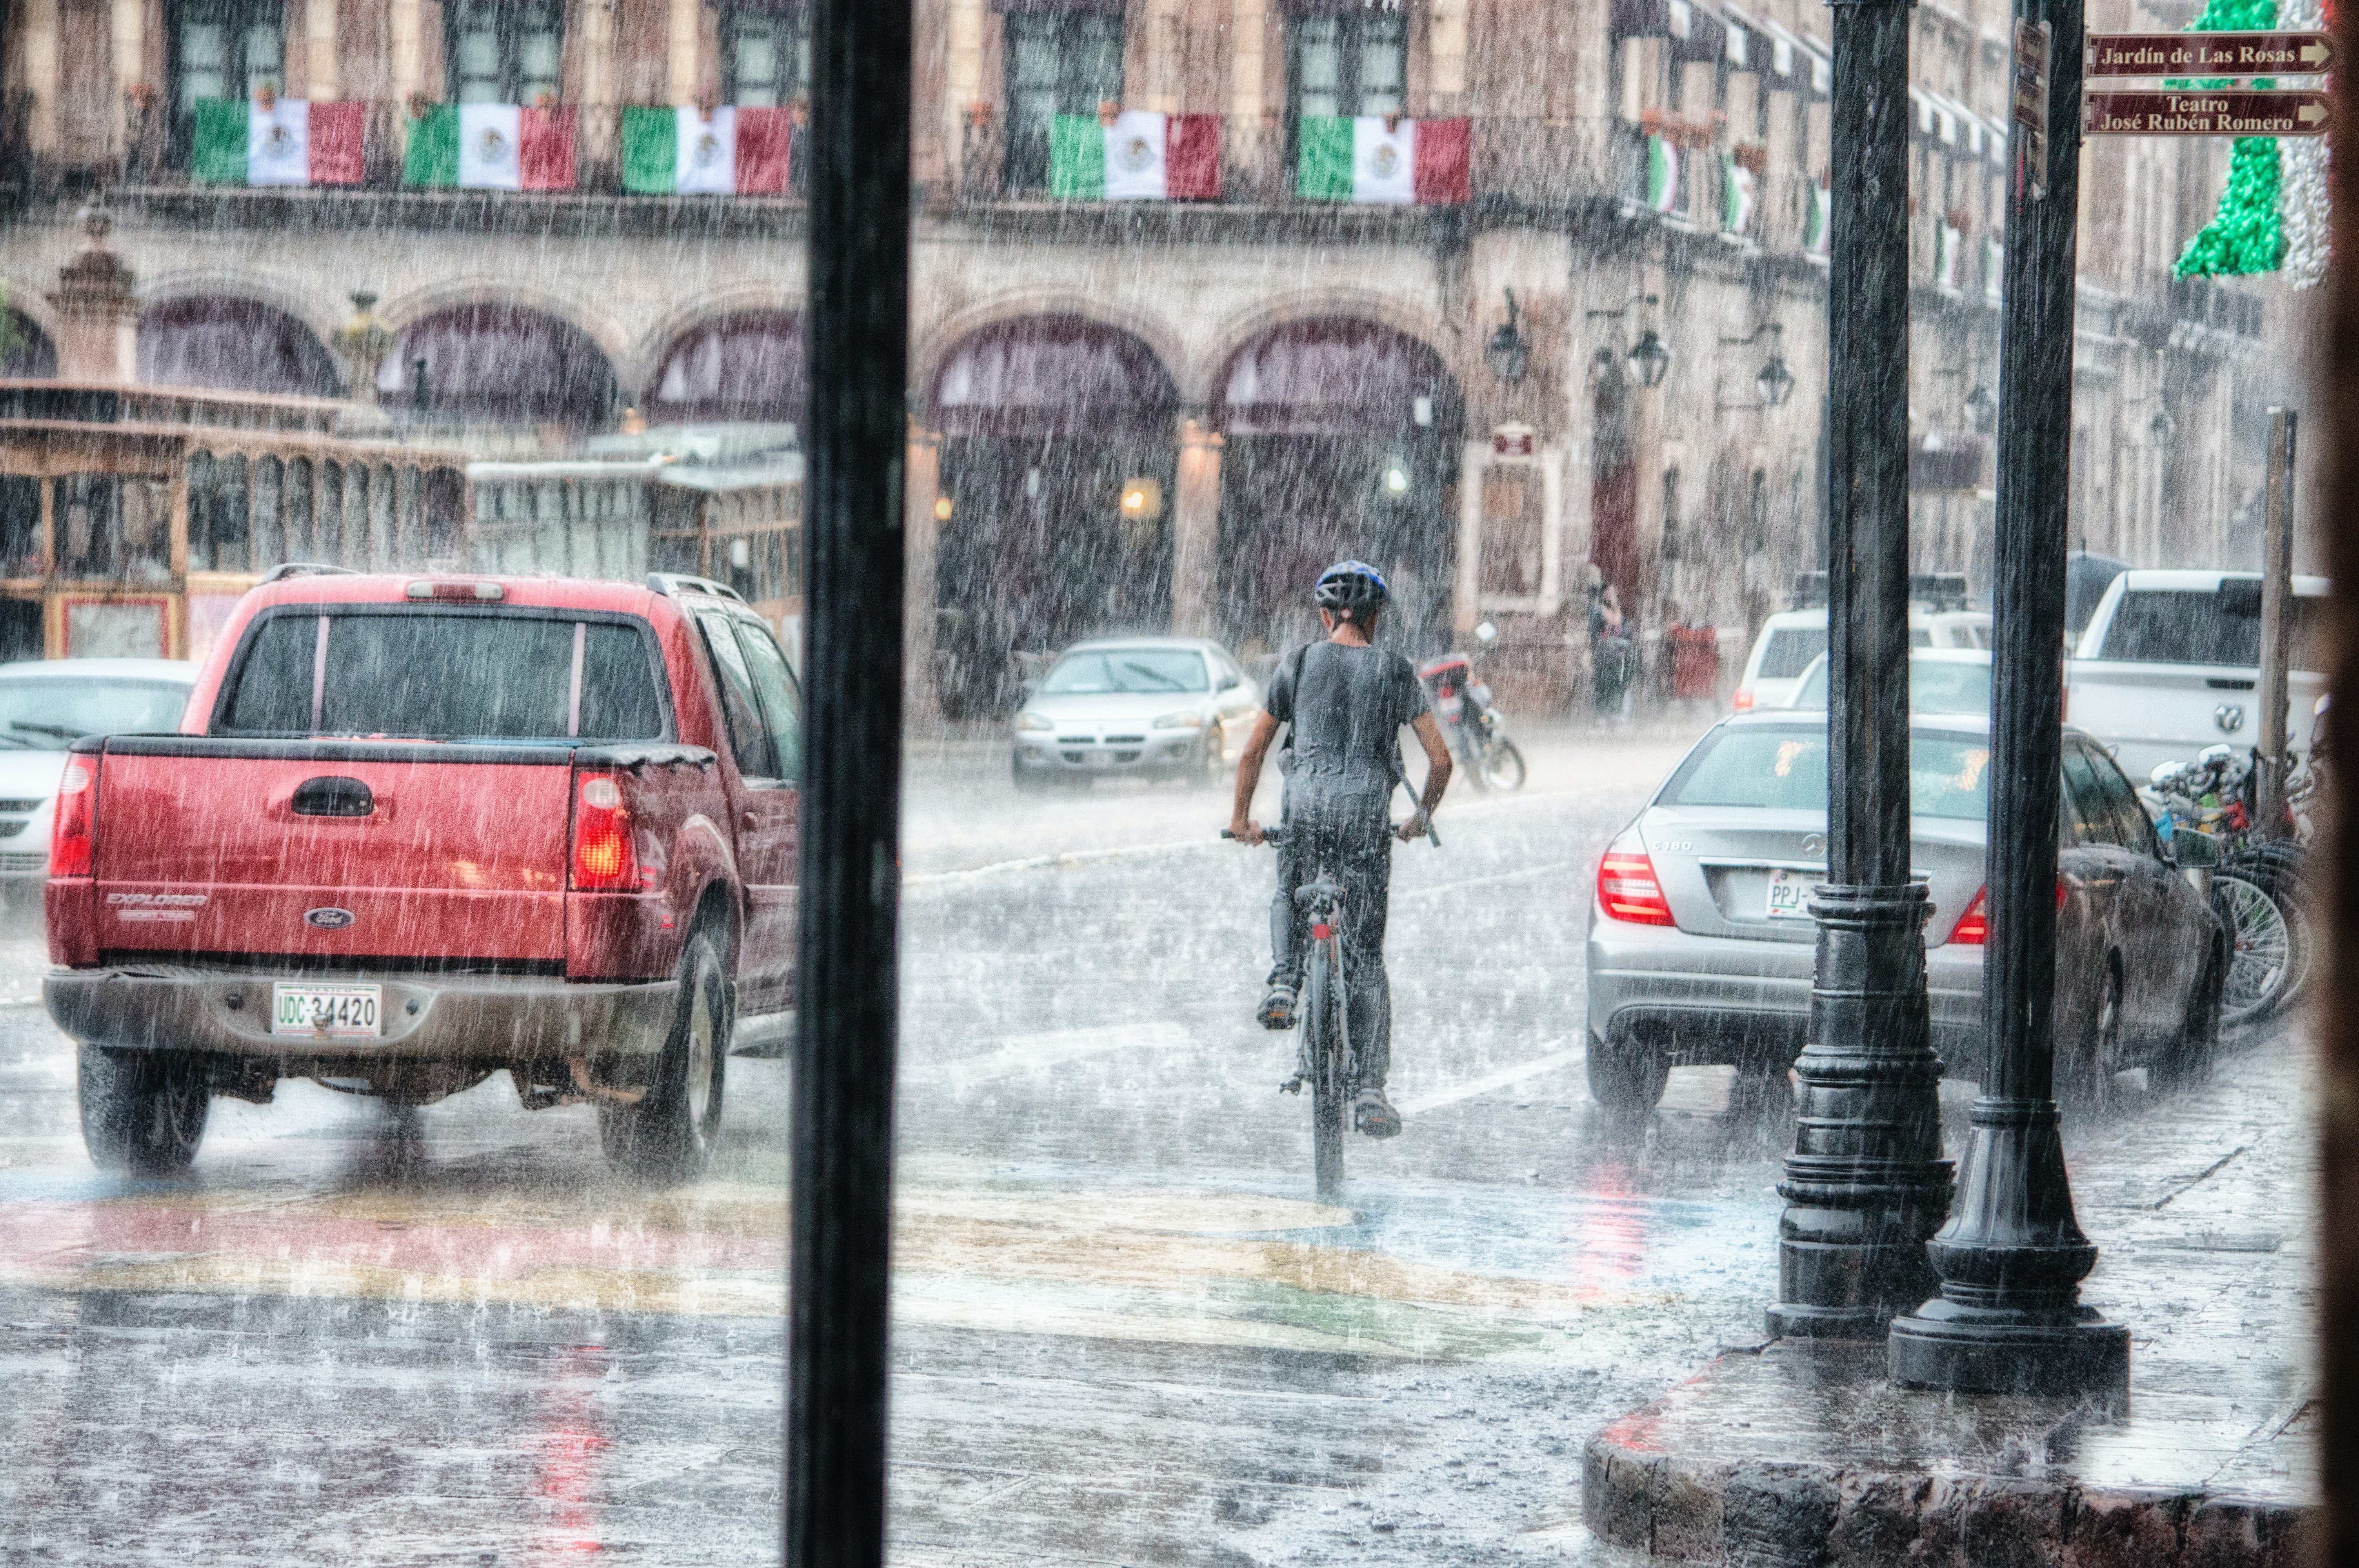 Pictured - An individual riding a bicycle during a rainy day | Source: Pexels 